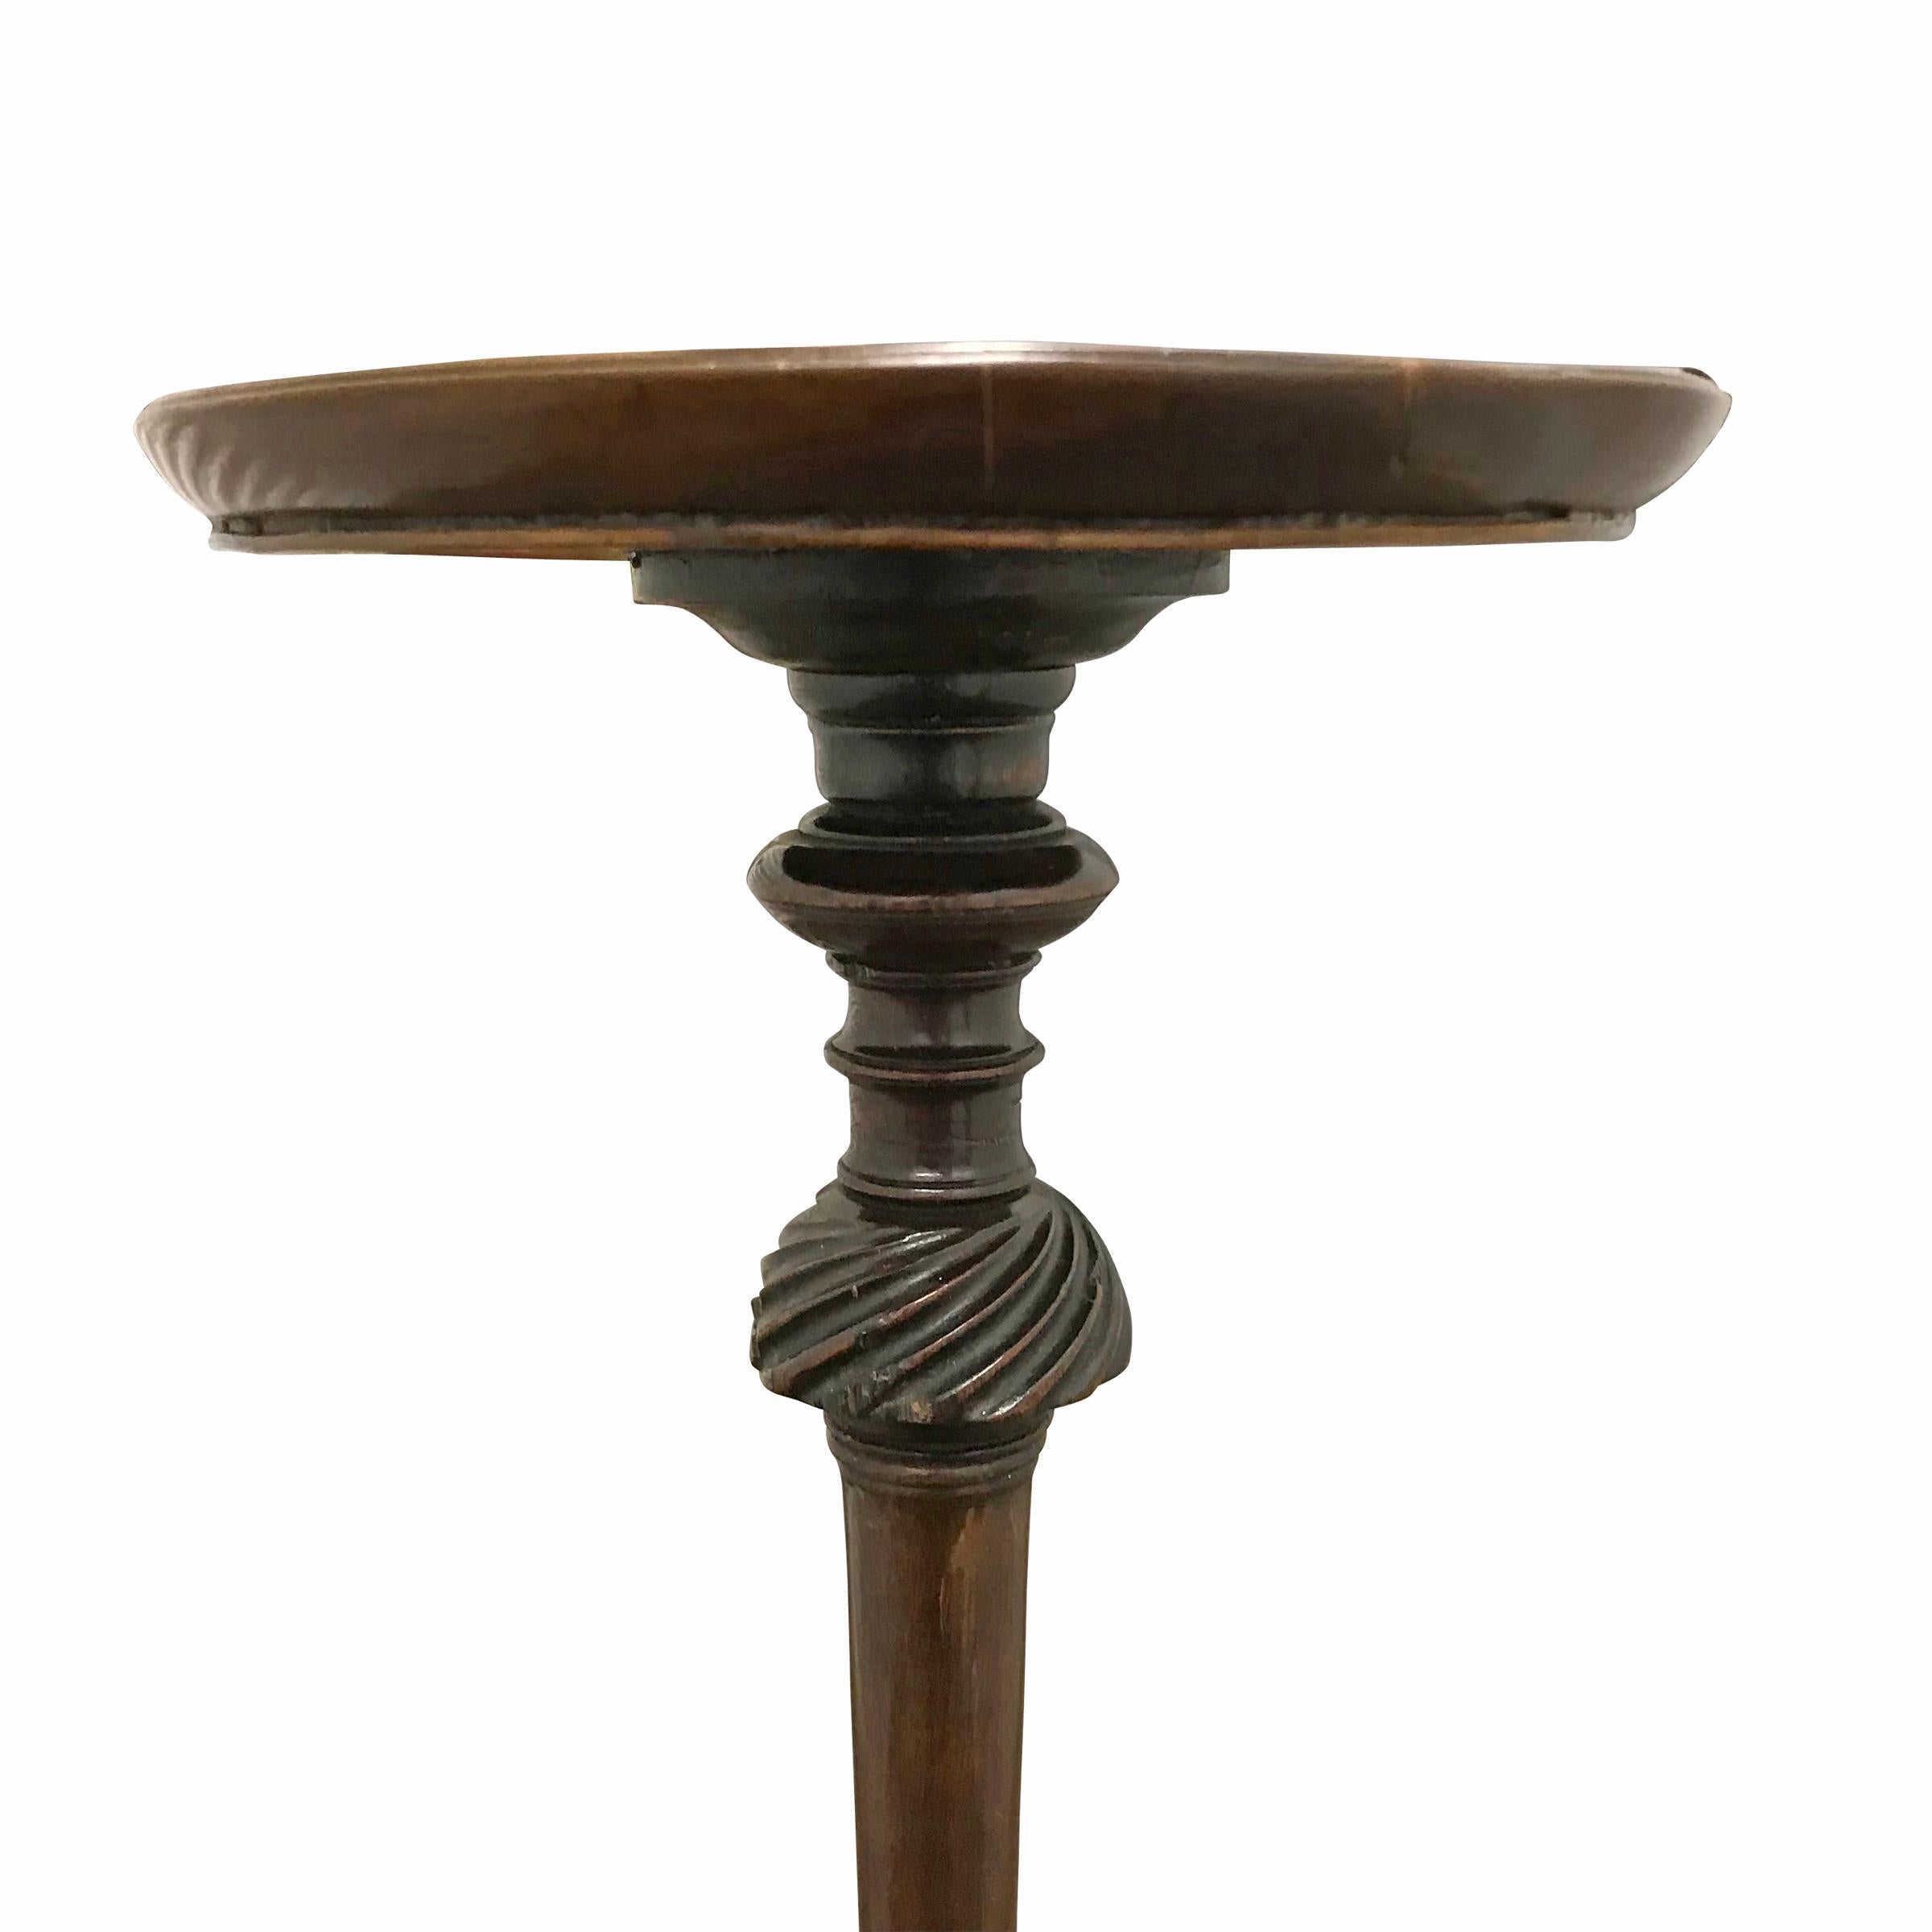 An 18th century Queen Anne mahogany candle stand with a top turned of one piece of wood with a shallow lip edge, wonderfully turned columnar turned pedestal with multiple turned knuckles, resting on a tripod leg base ending in Classic Queen Anne pad